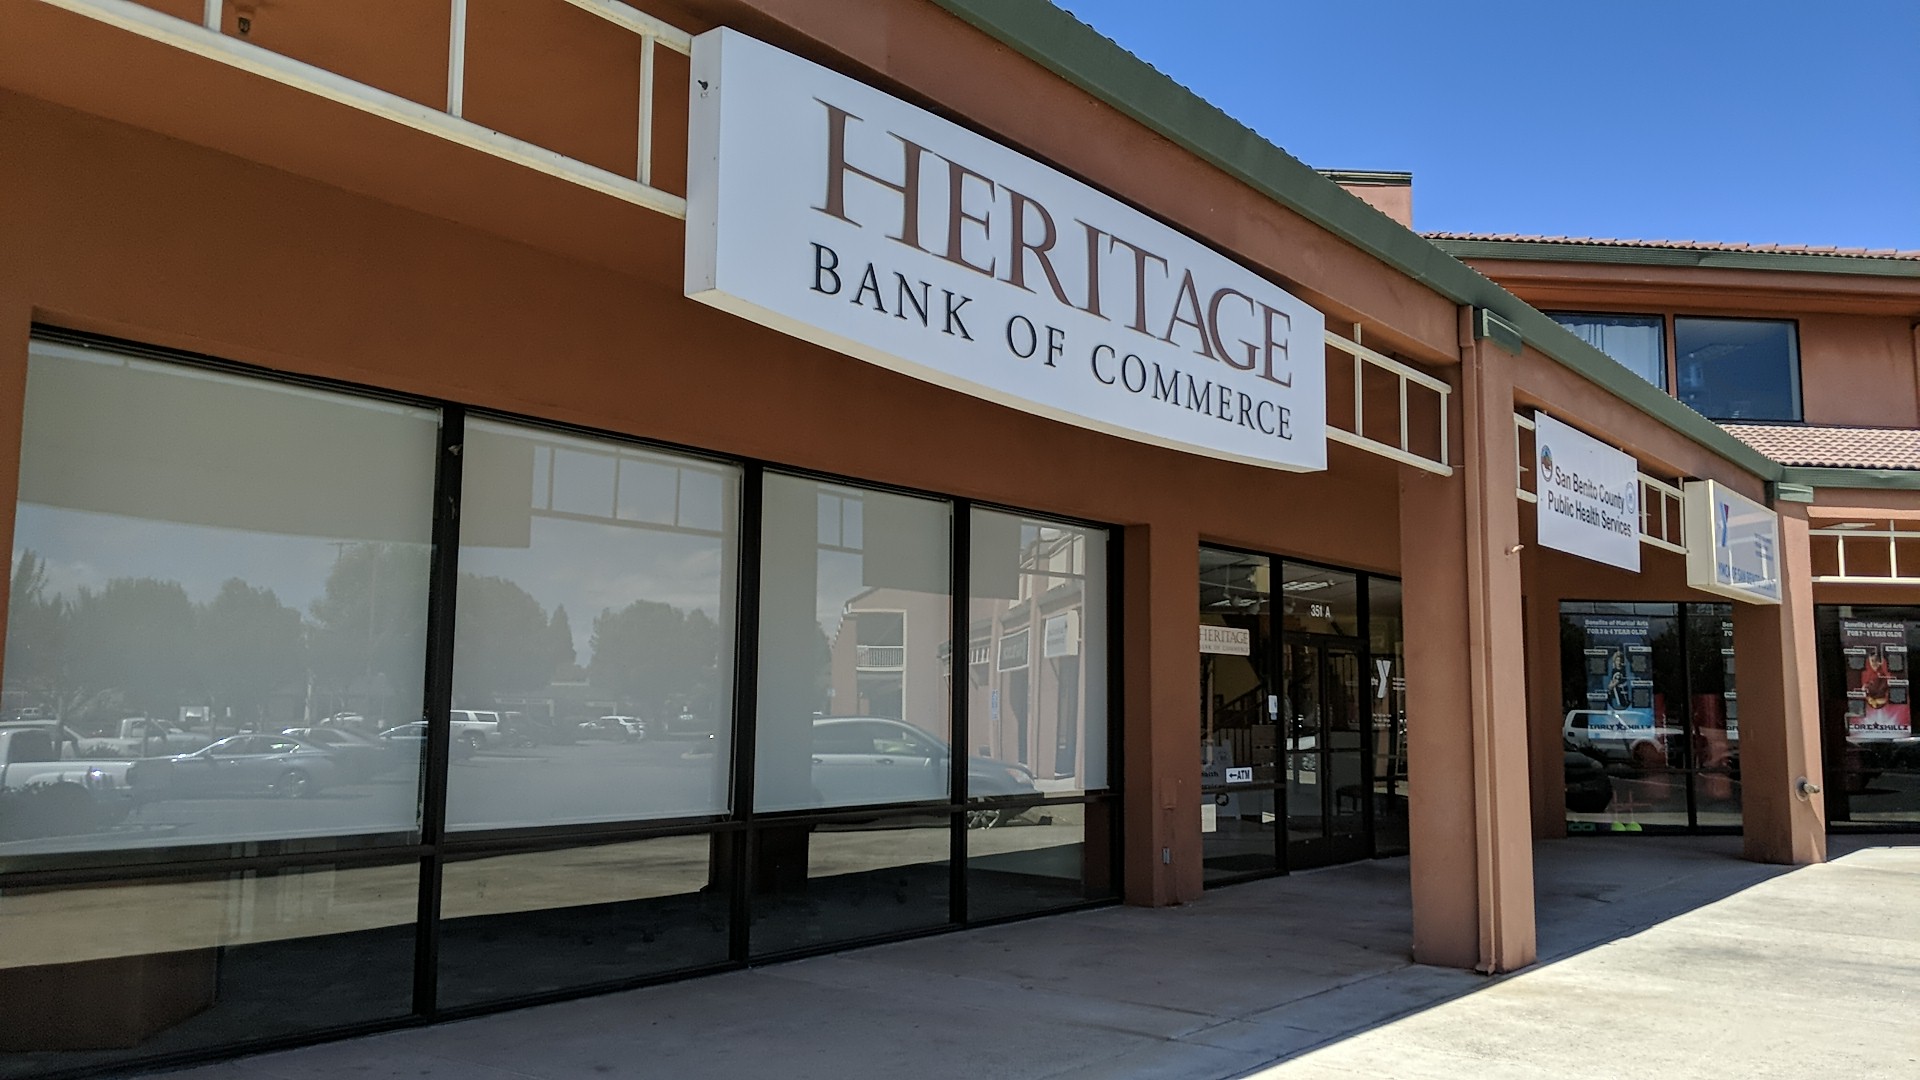 Heritage Bank of Commerce